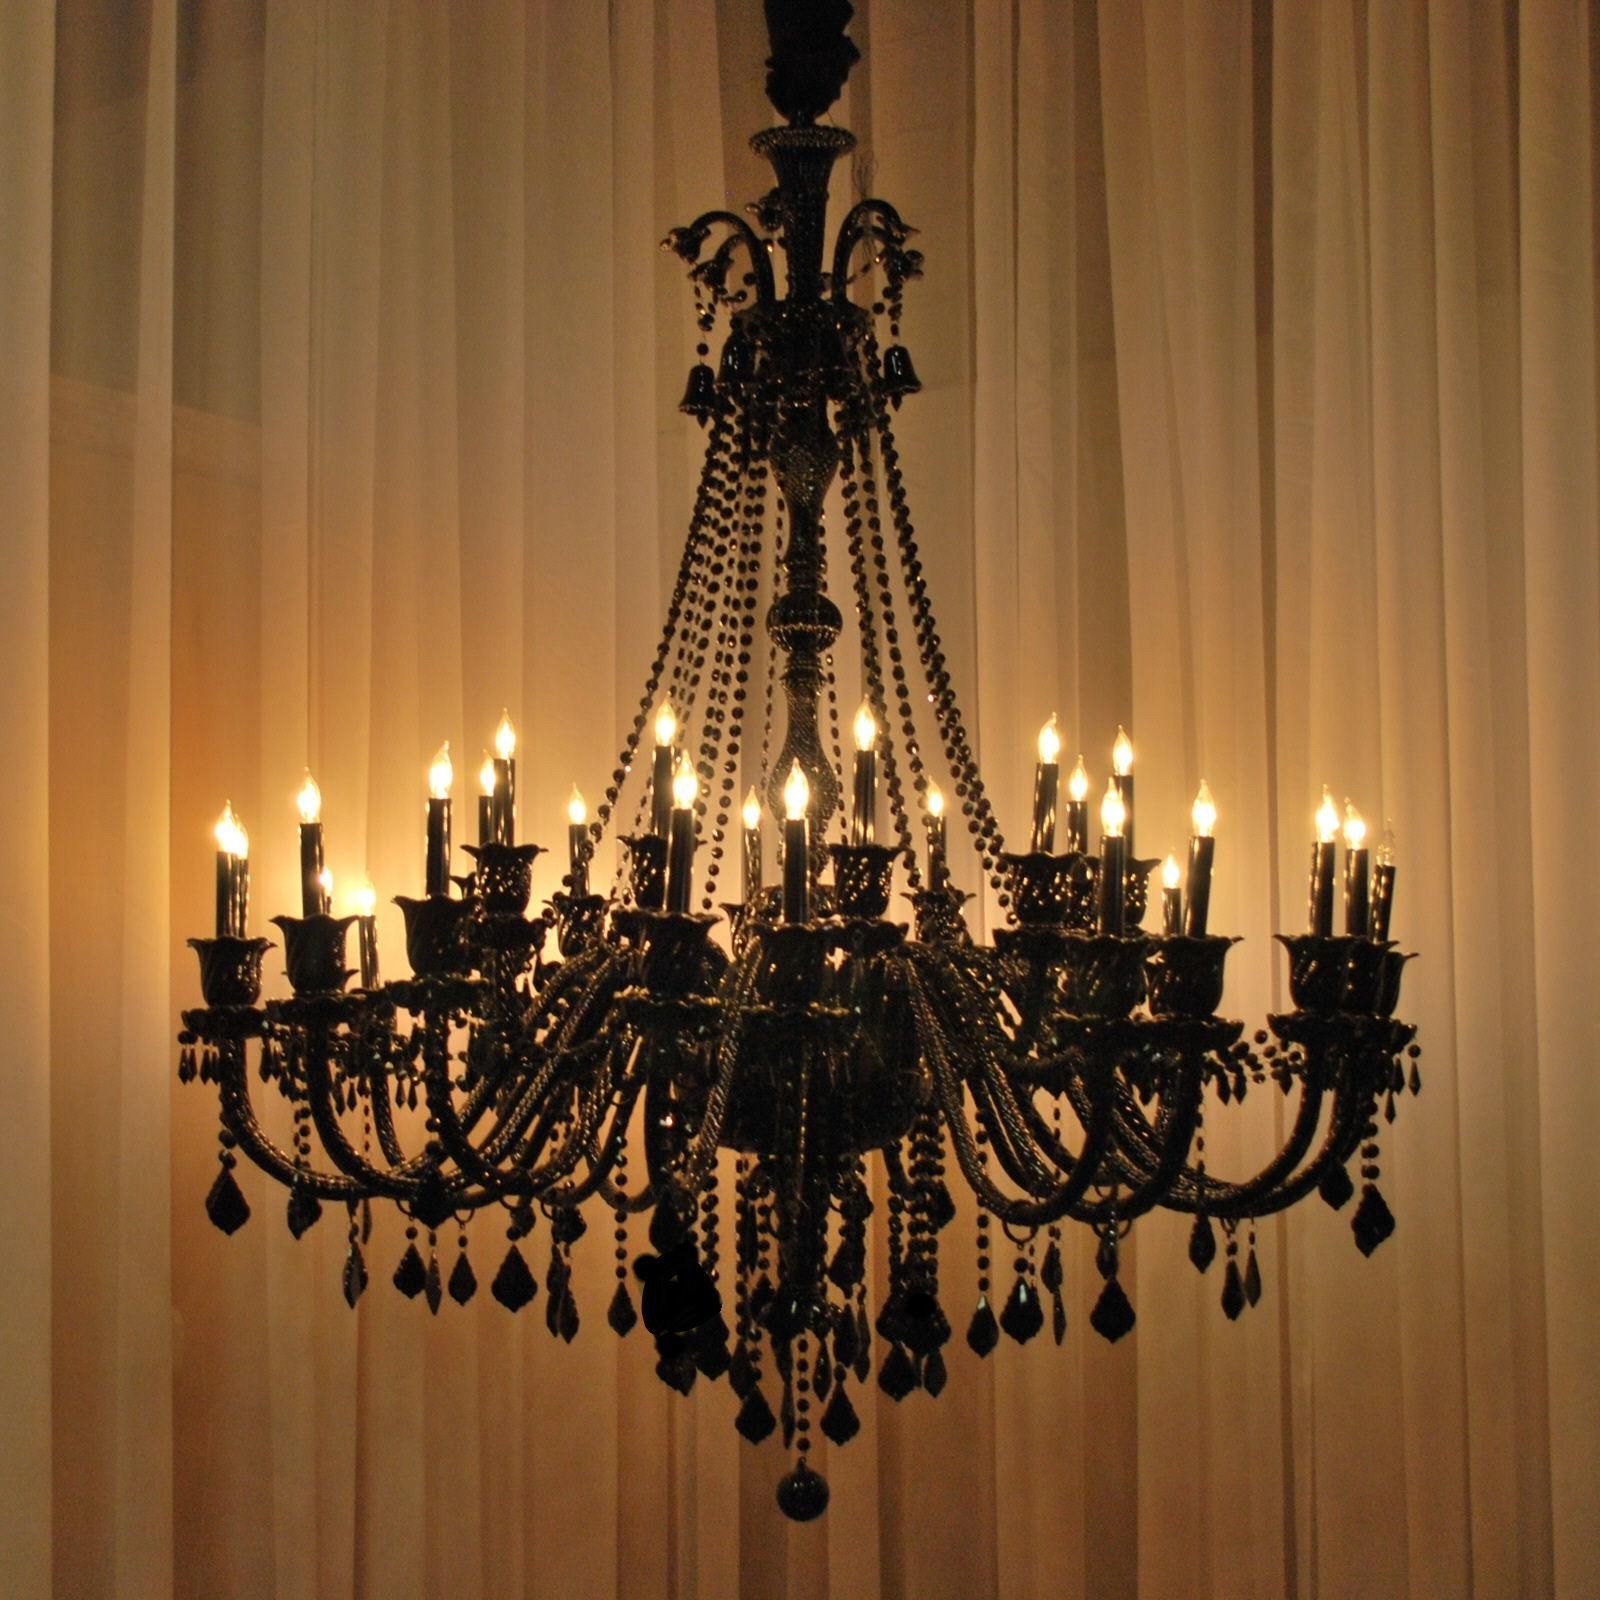 Large Chandeliers Large Crystal Chandeliers Pertaining To Big Chandeliers (View 11 of 15)